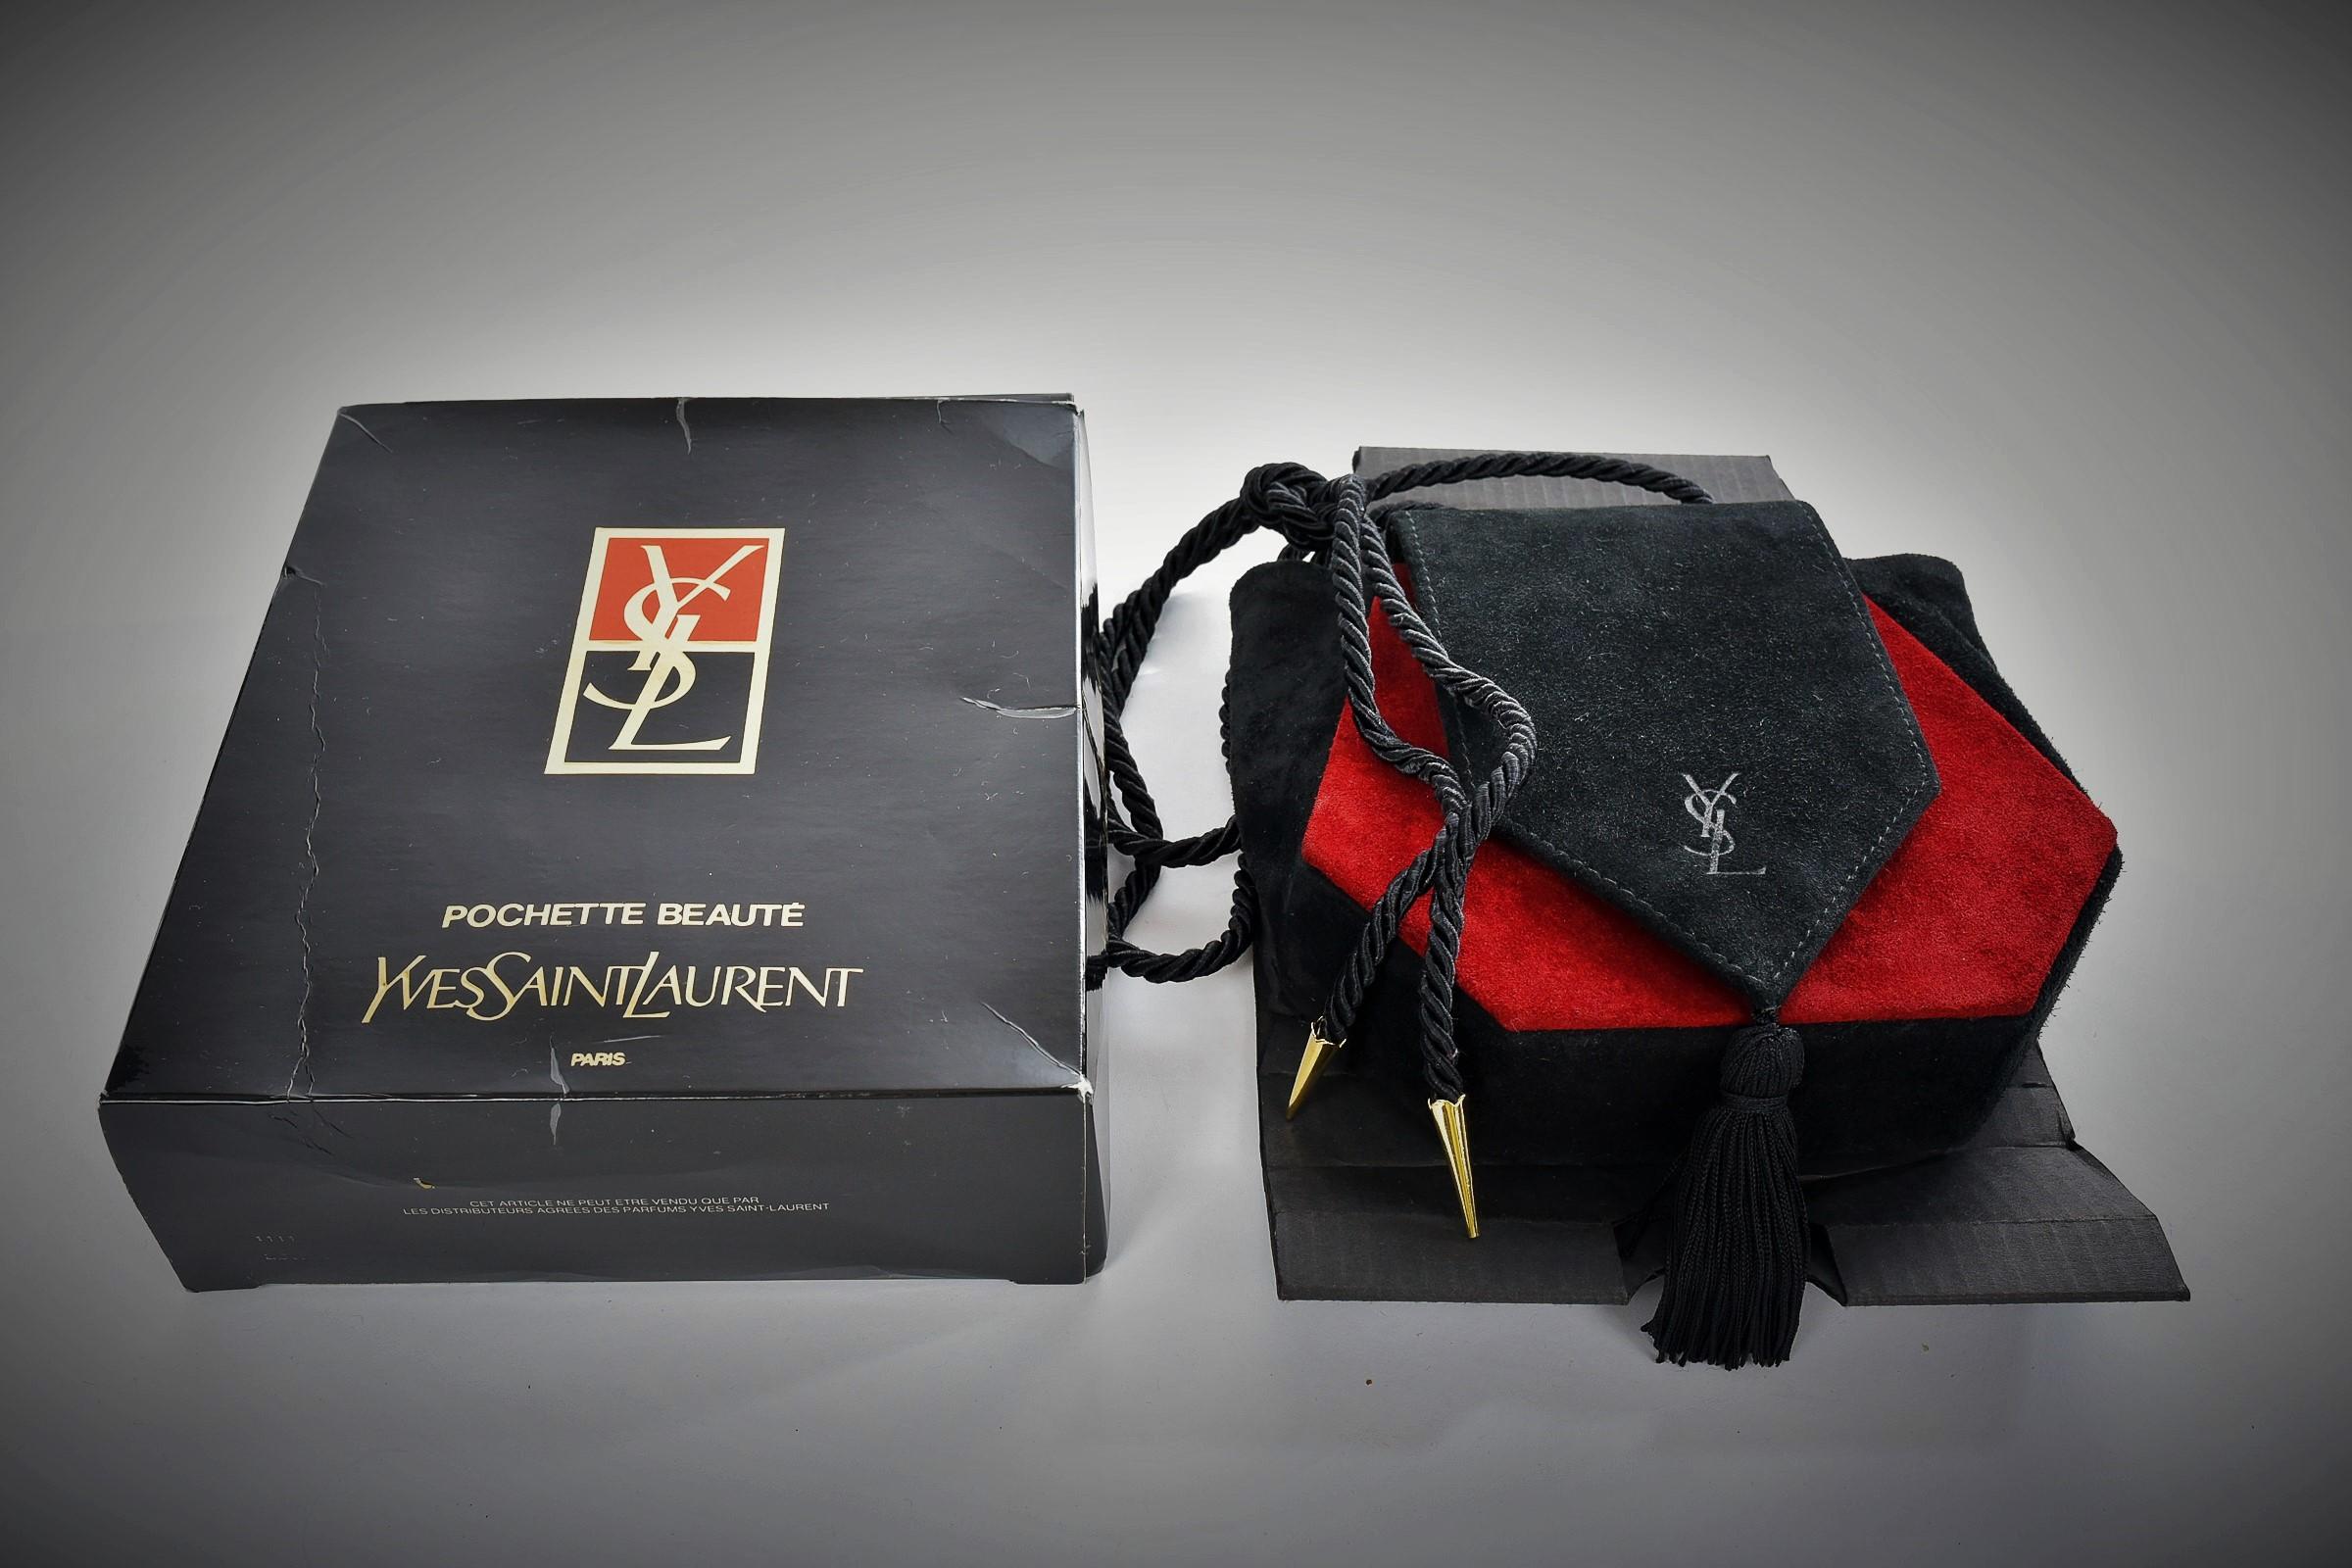 A Suede Evening Bag Yves Saint Laurent Collection Opera Ballets Russes 1976 5